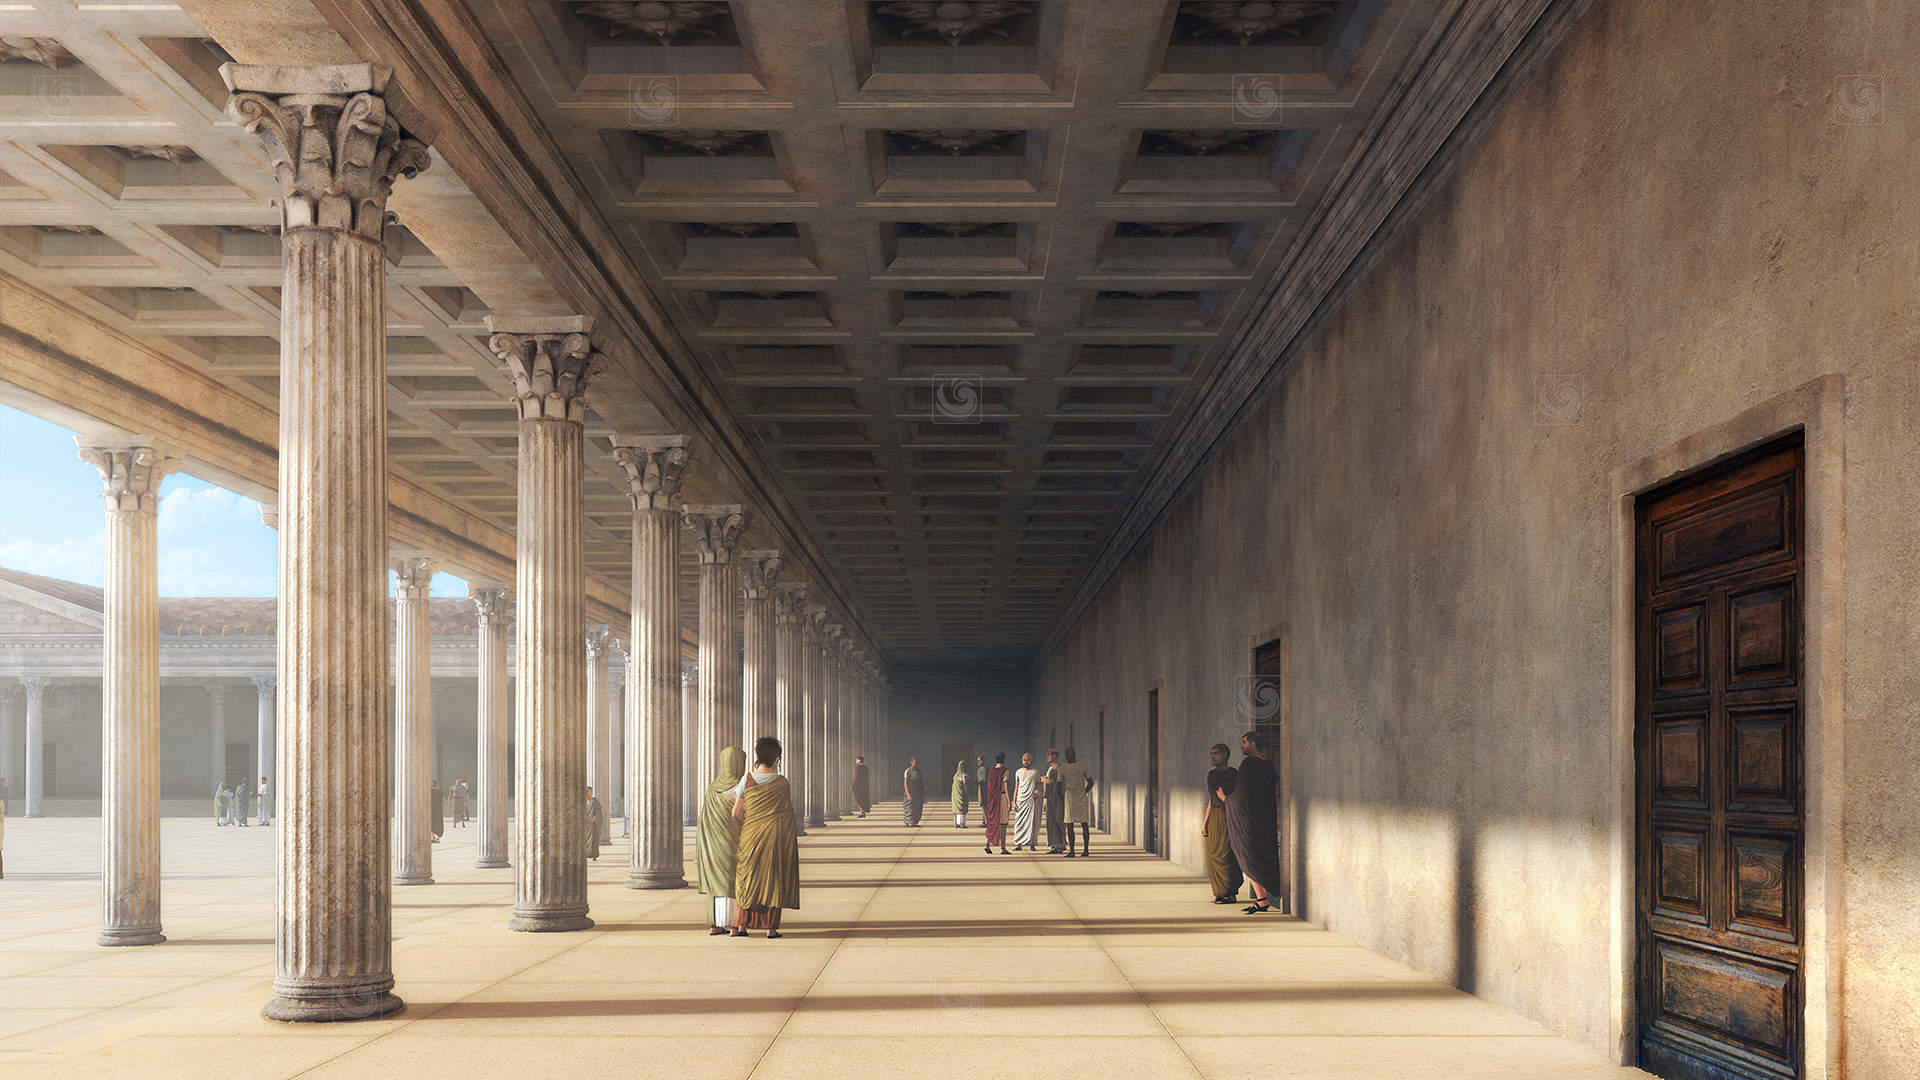 3D animation frame showing the porticoed corridors of the ancient Forum of Caesaraugusta